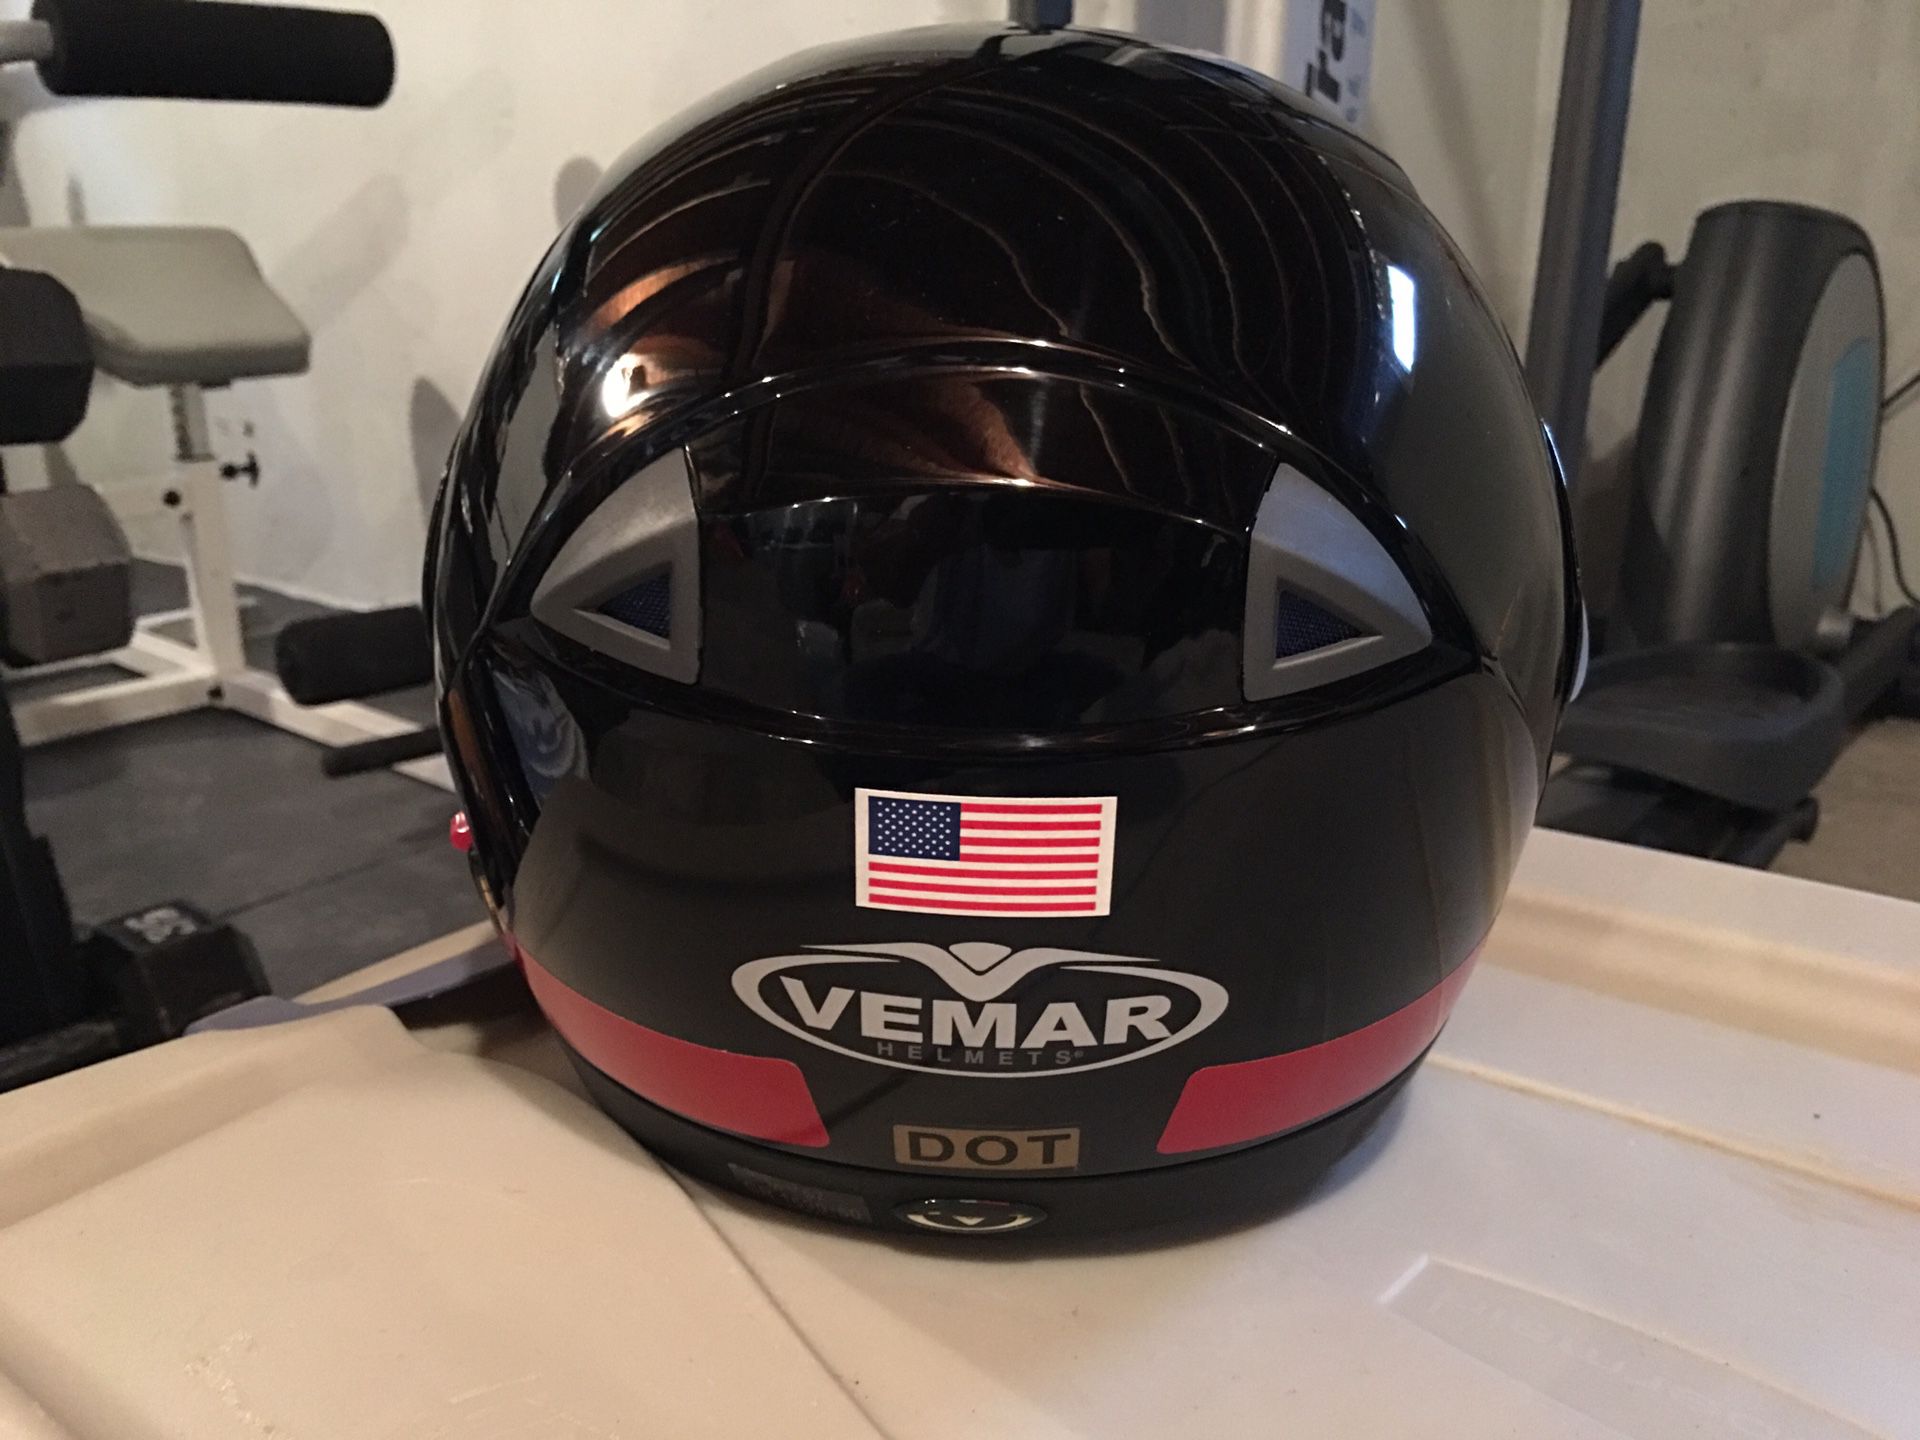 Vemar lightweight Full-face Helmet with Commo system